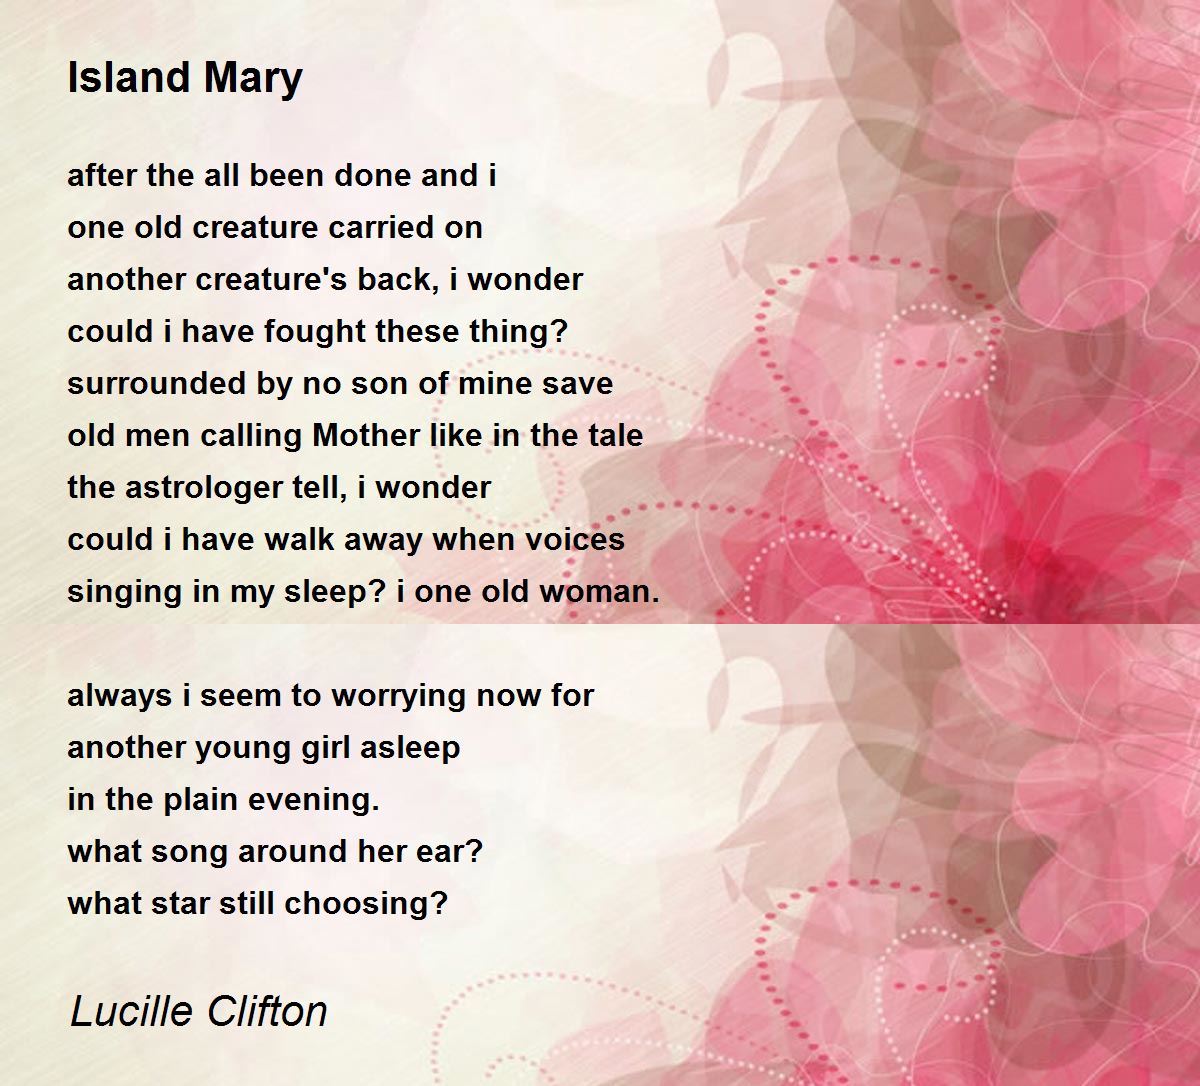 Island Mary Poem by Lucille Clifton - Poem Hunter Comments